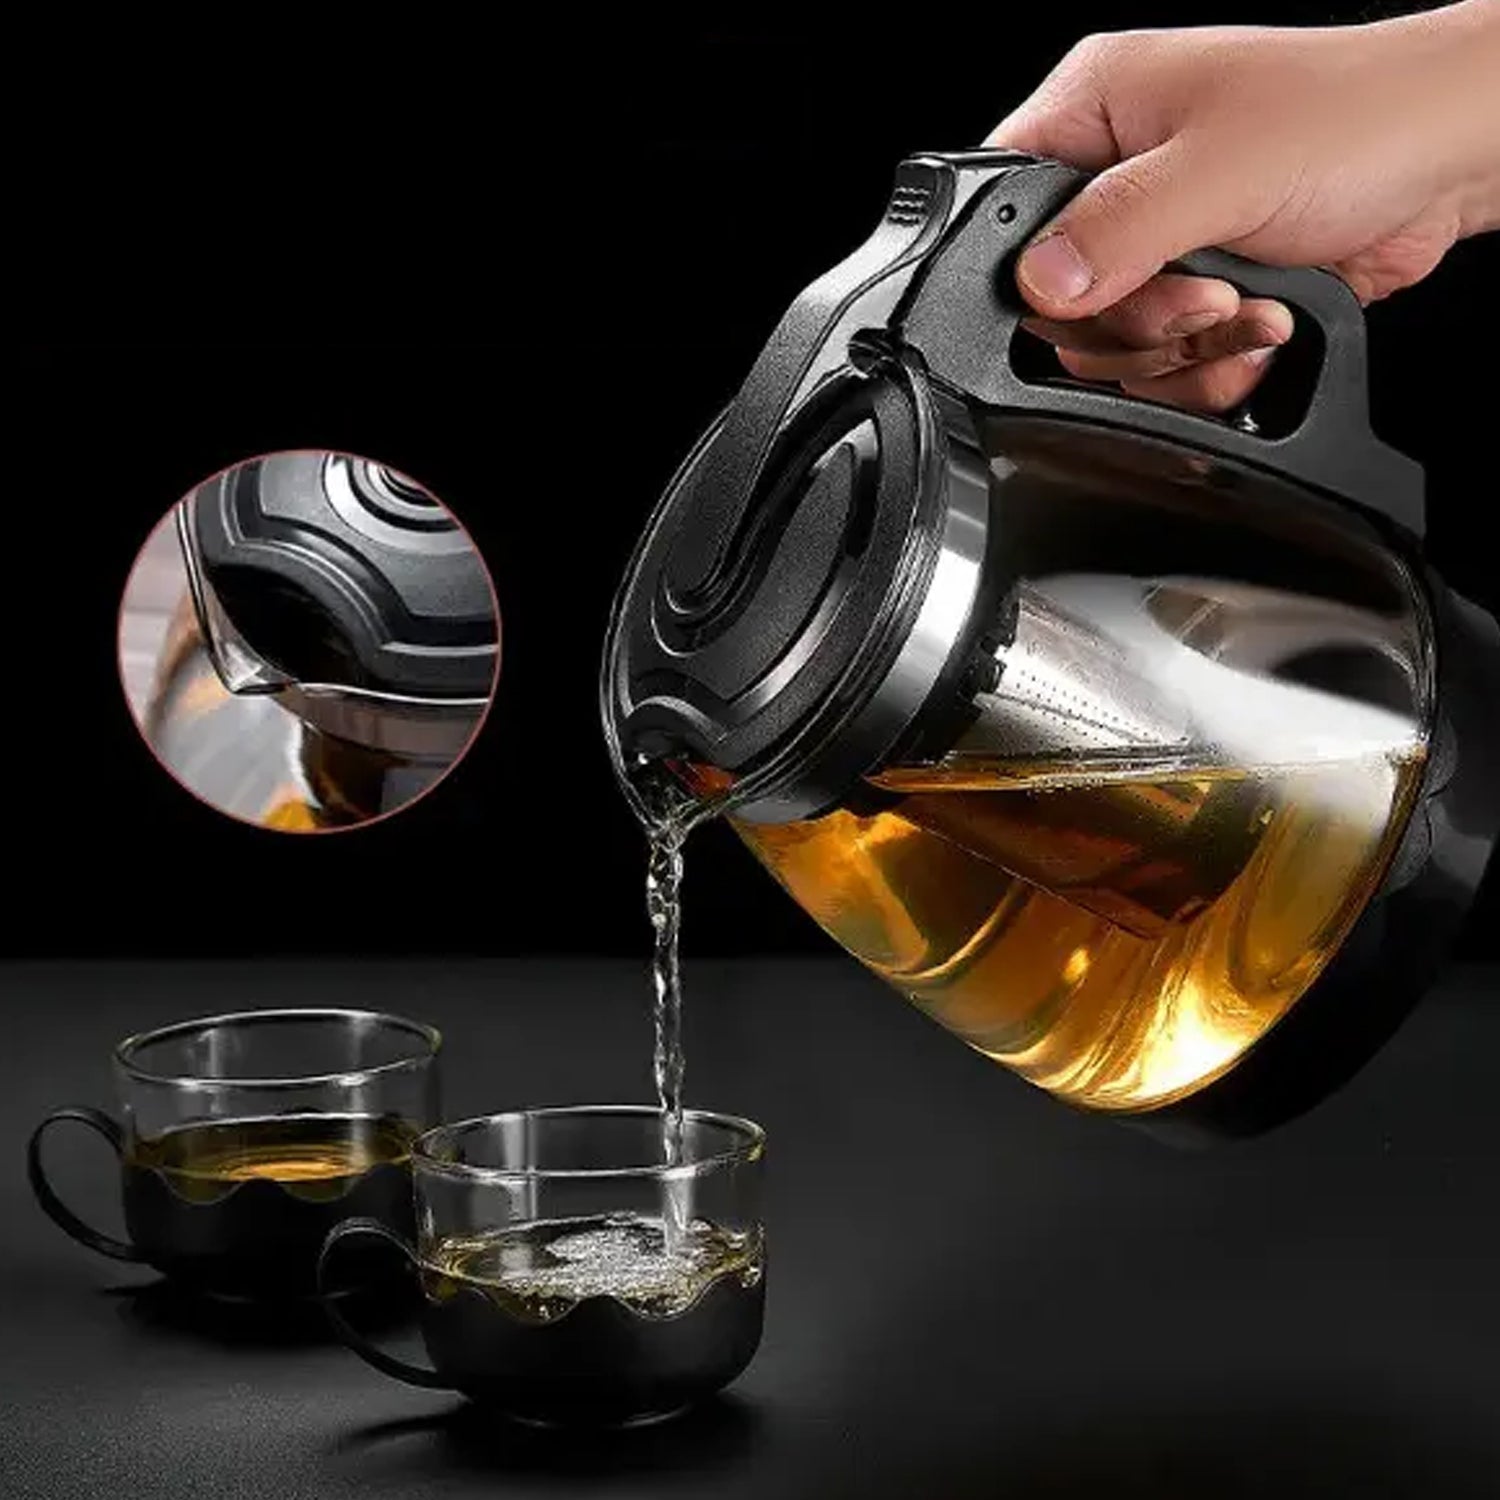 5886 Flame Proof Glass Kettle & Cup  Set With Stainer High Quality Kettle Set For Home & Cafe Use  (4 Cup & 1 Kettle)